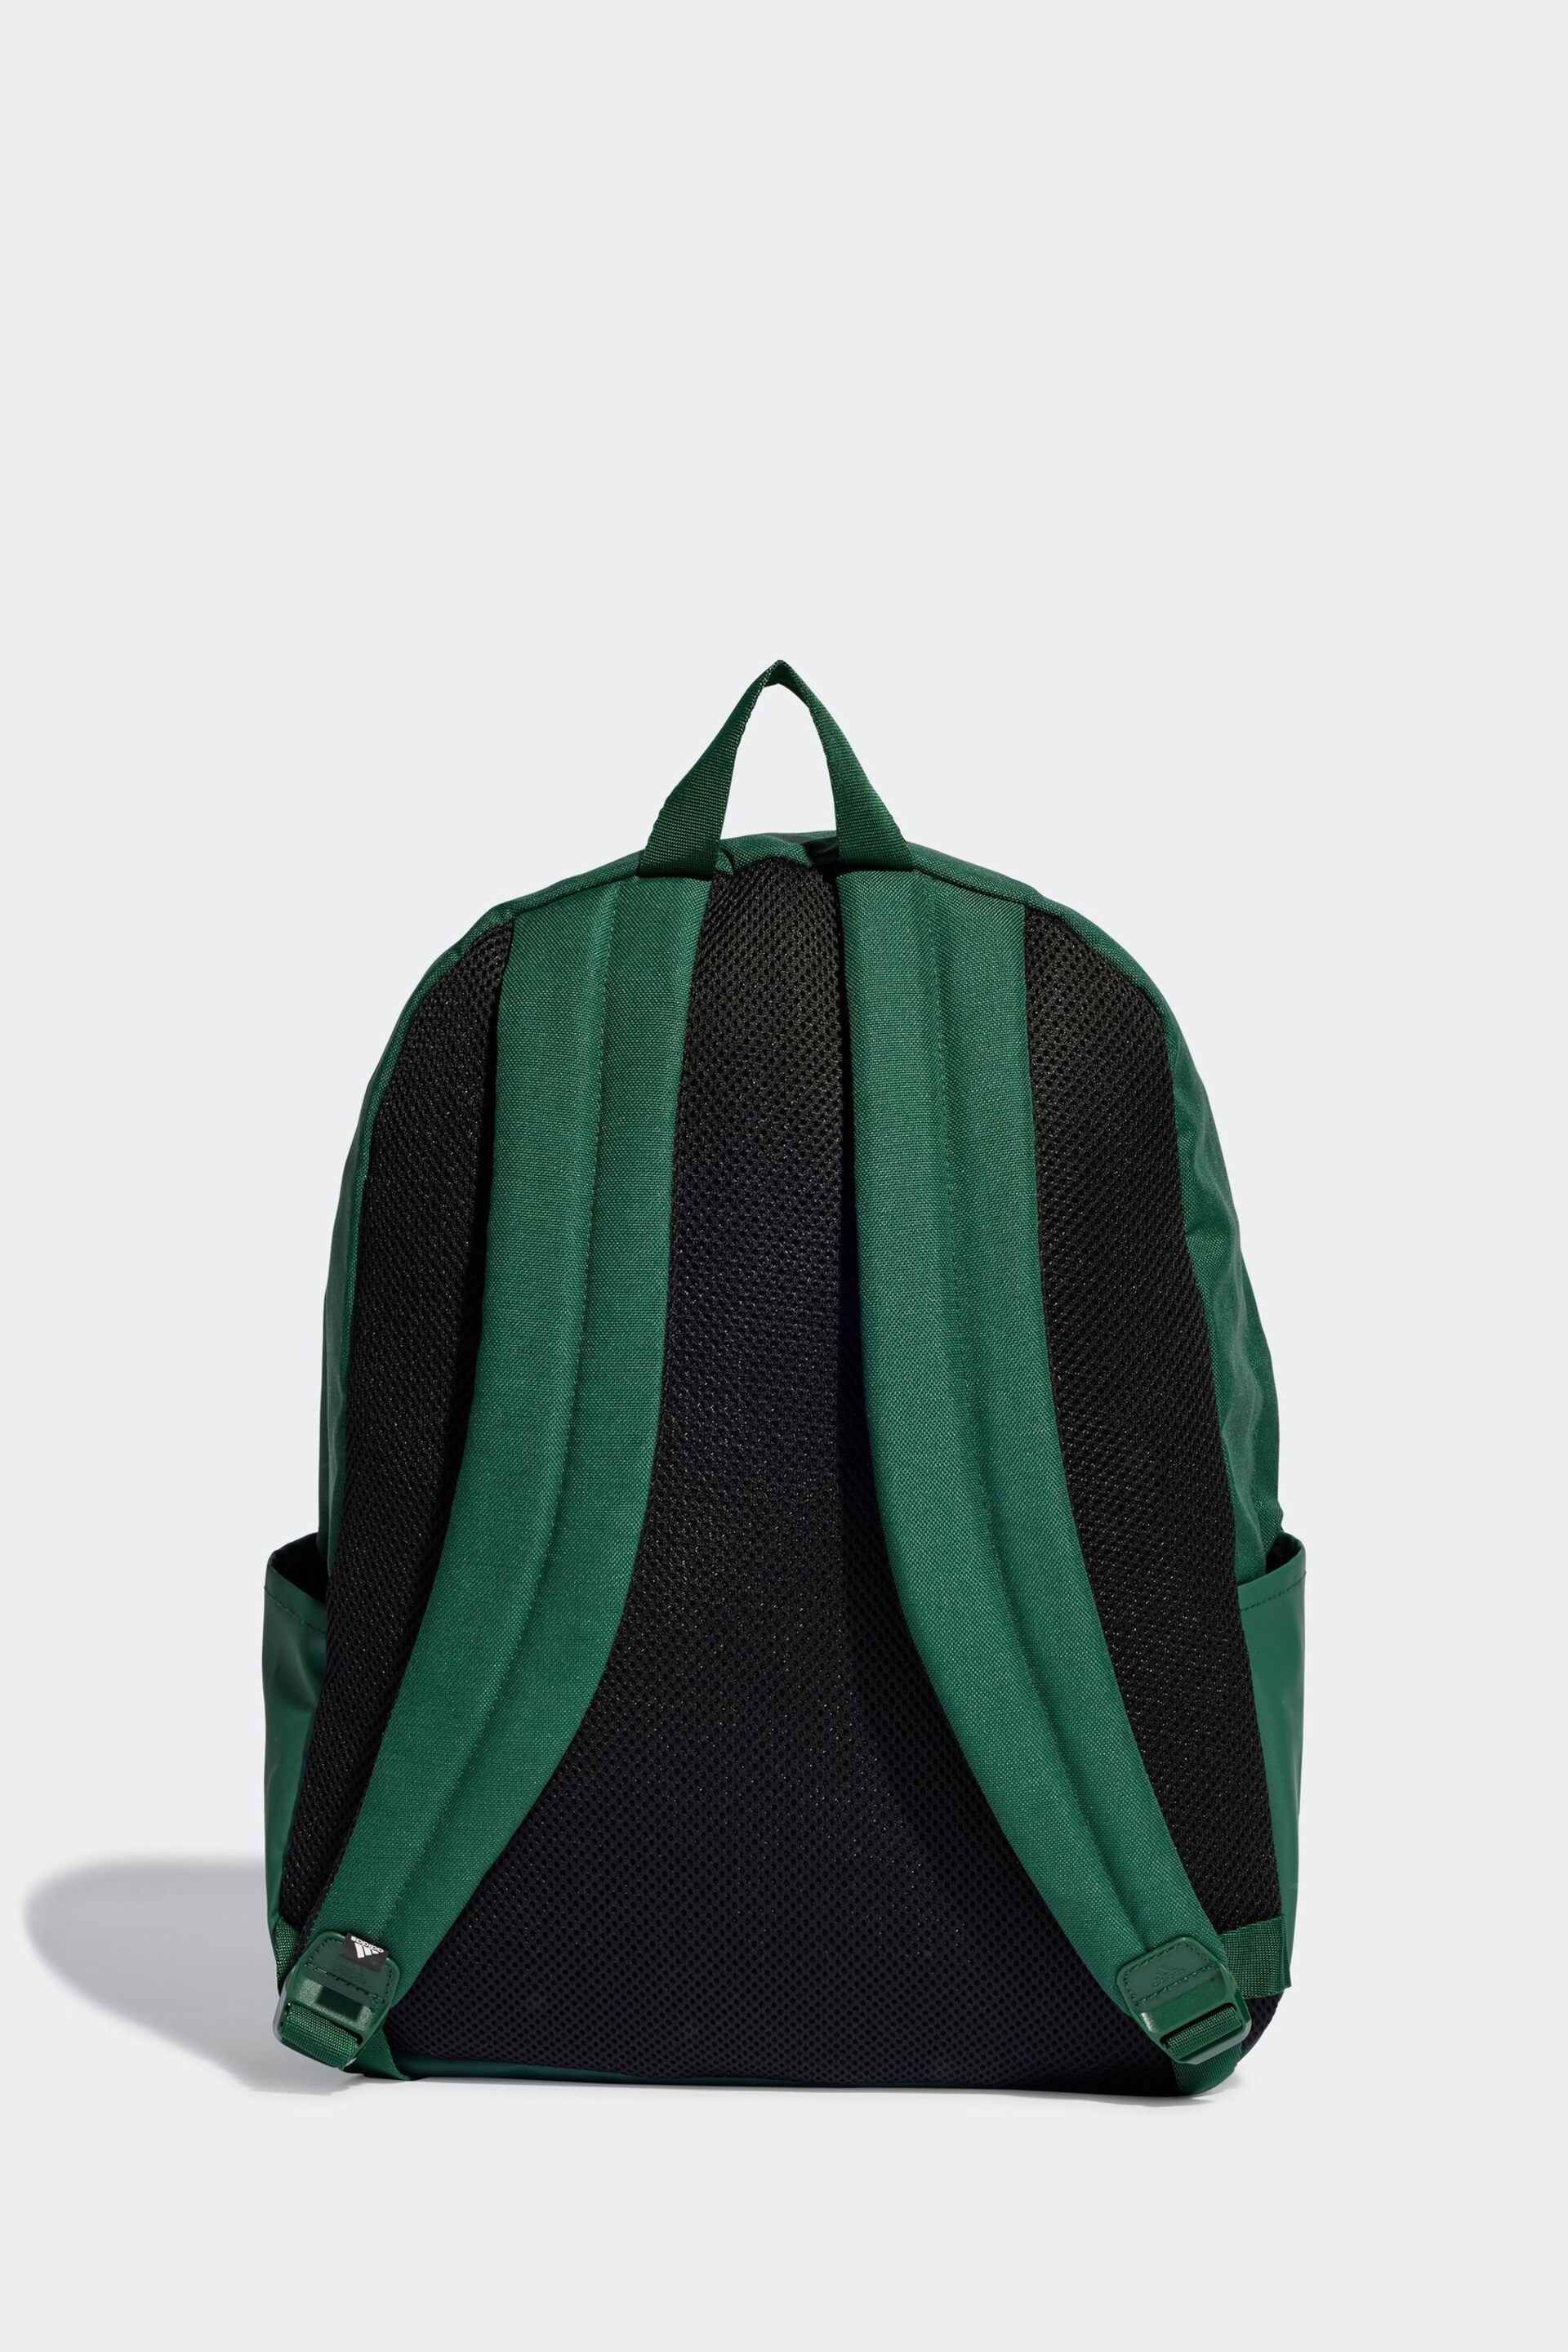 adidas Green Adult Classic Brand Love Initial Print Backpack - Image 2 of 6